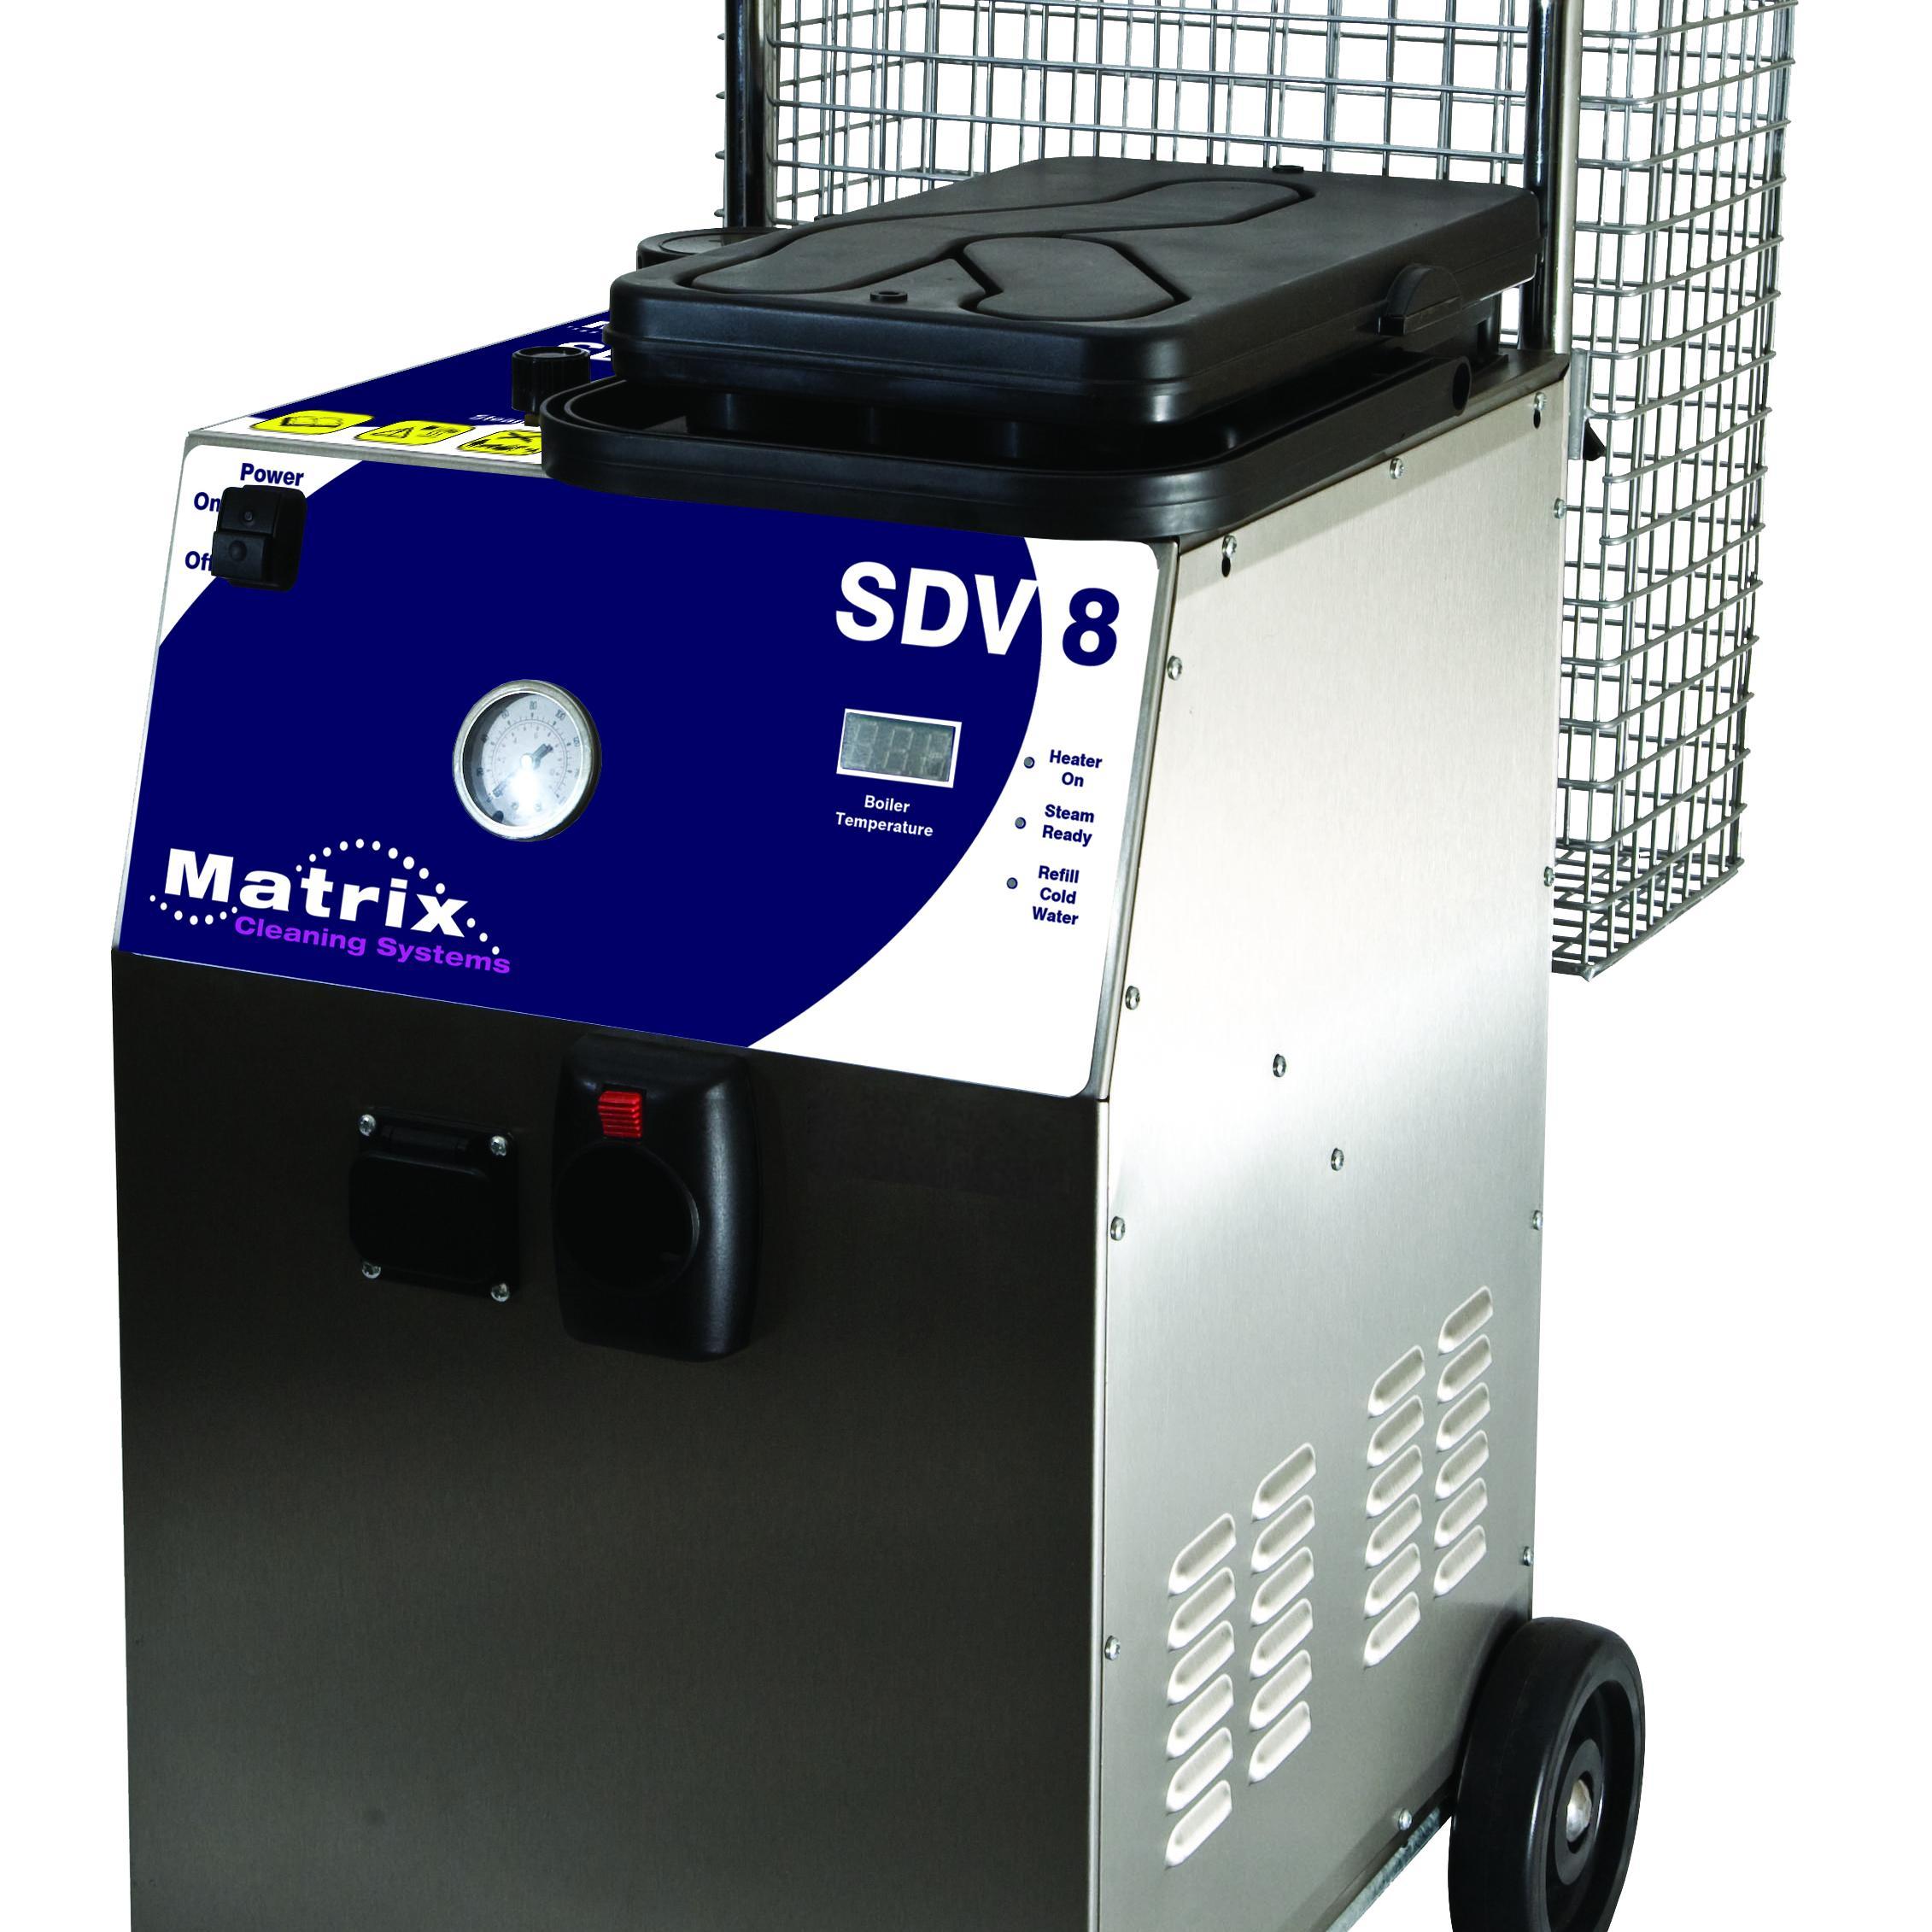 Matrix Cleaning Systems is  the UK's leading steam cleaning machine manufacturer.